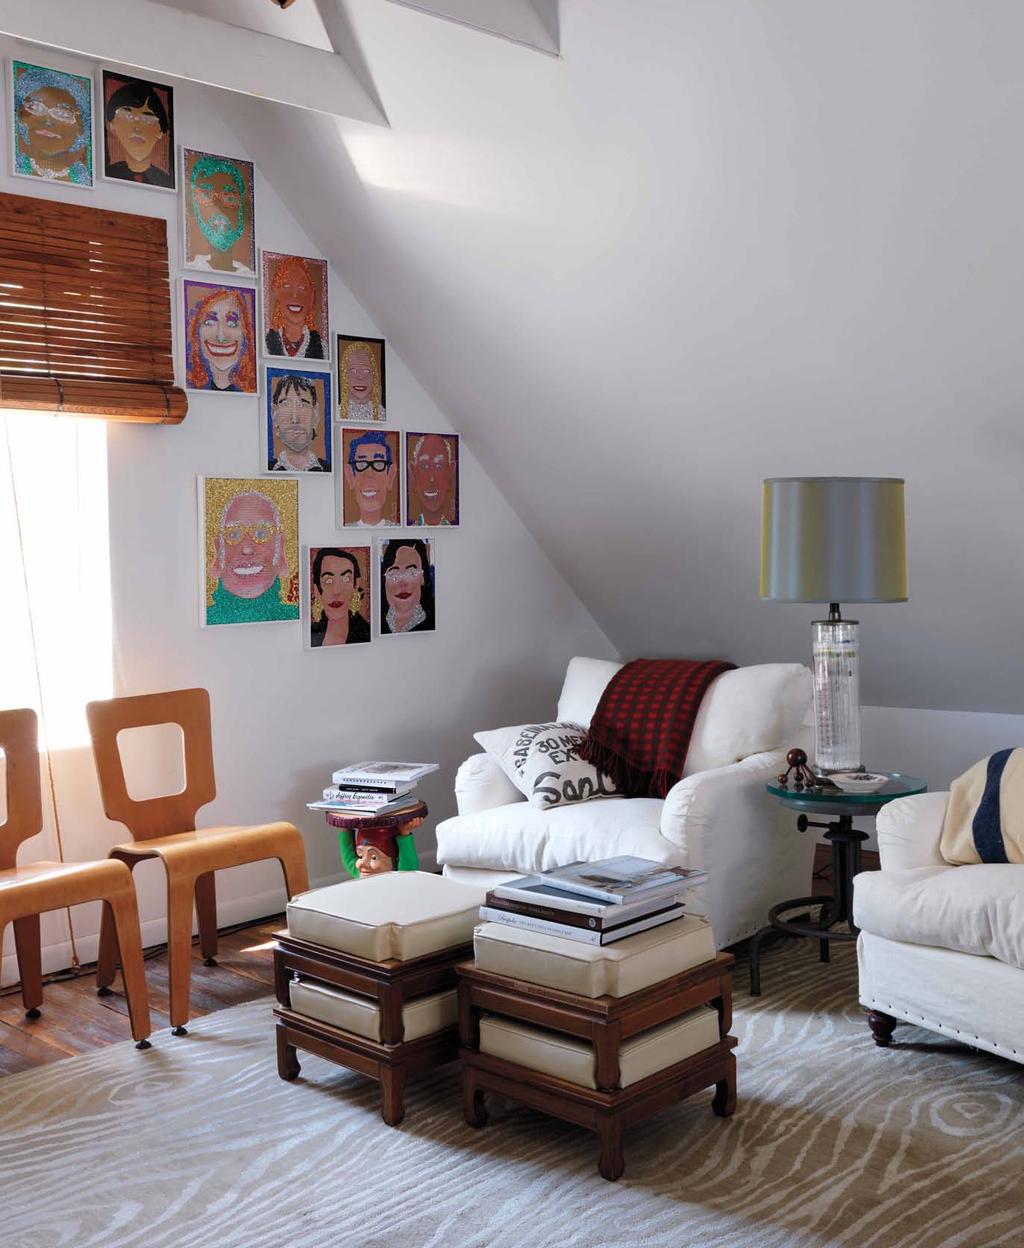 Inject whimsy Playing off the neutral furnishings in an upstairs nook, Moss displays glittery portraits of family and friends that he commissioned from Sereno Wilson of Project Onward (an